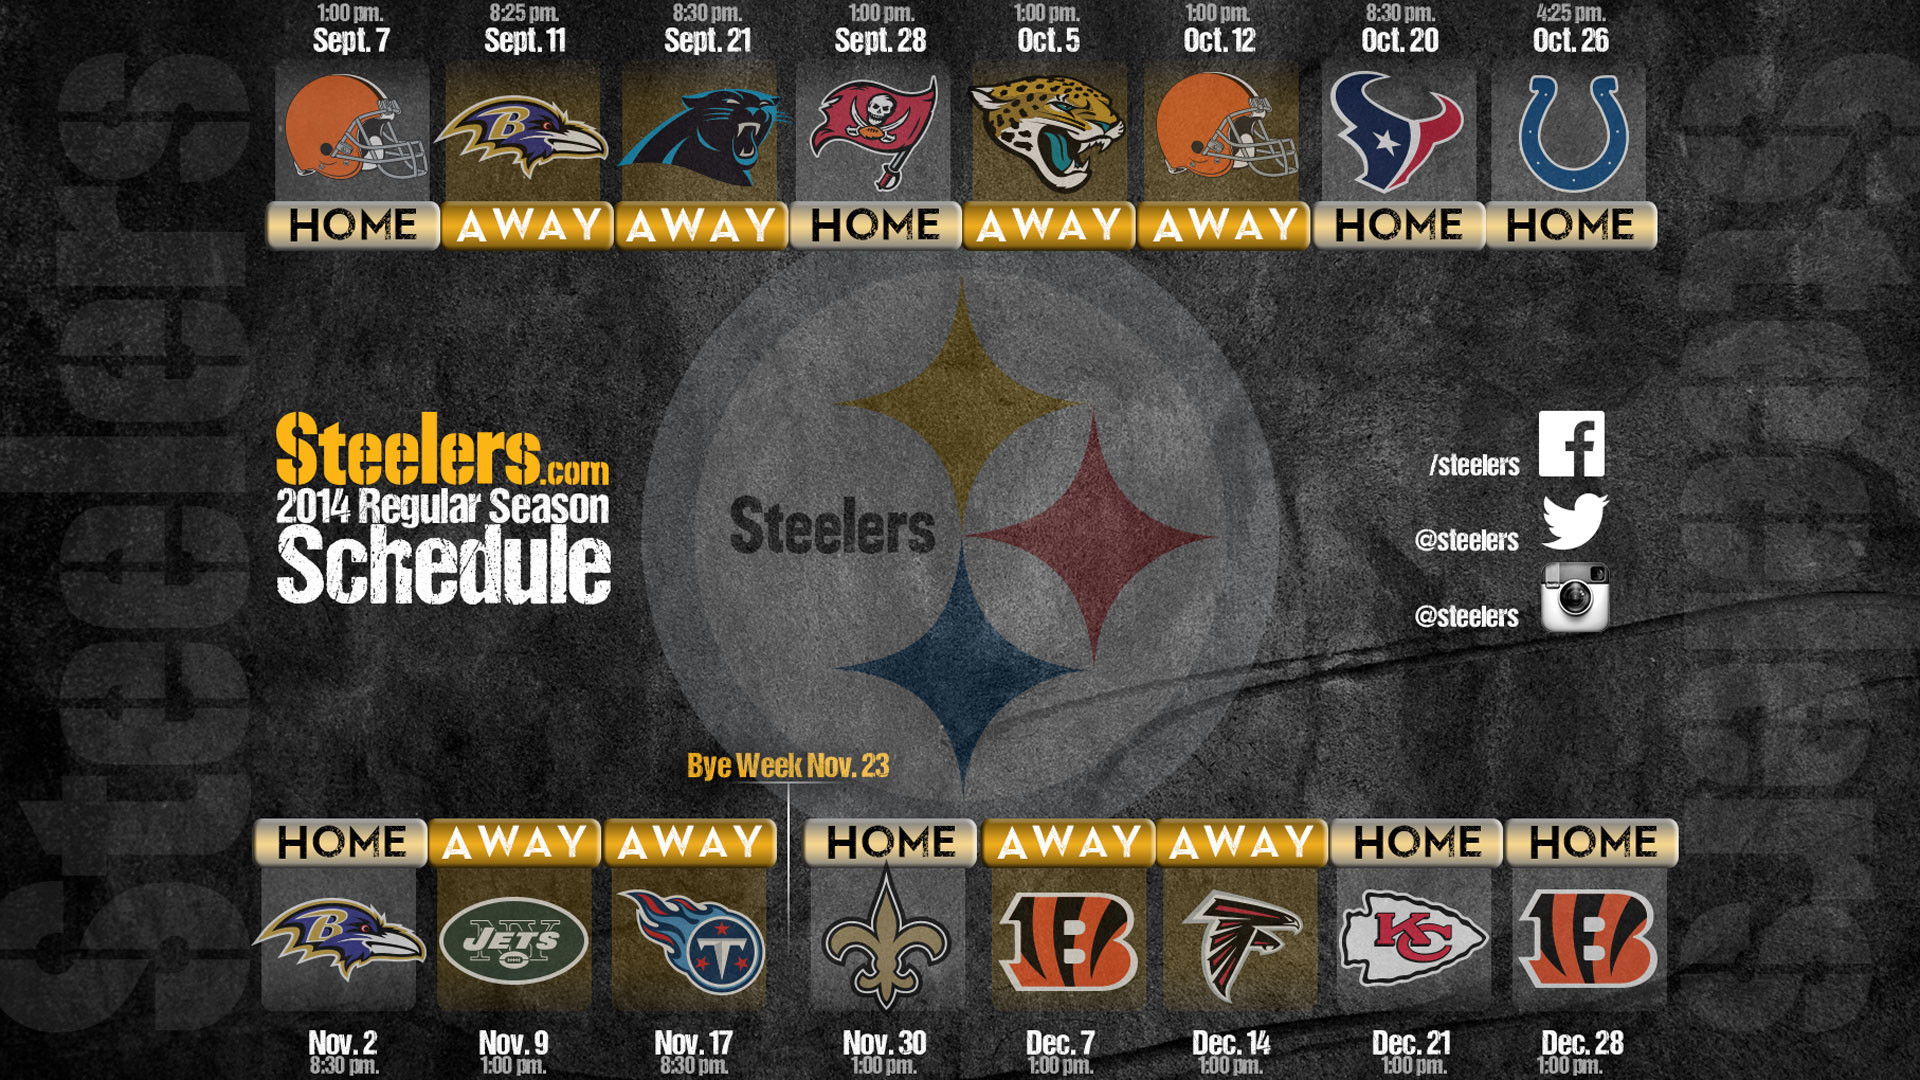 1920x1080 Backgrounds Pittsburgh Steelers Wallpaper HD.